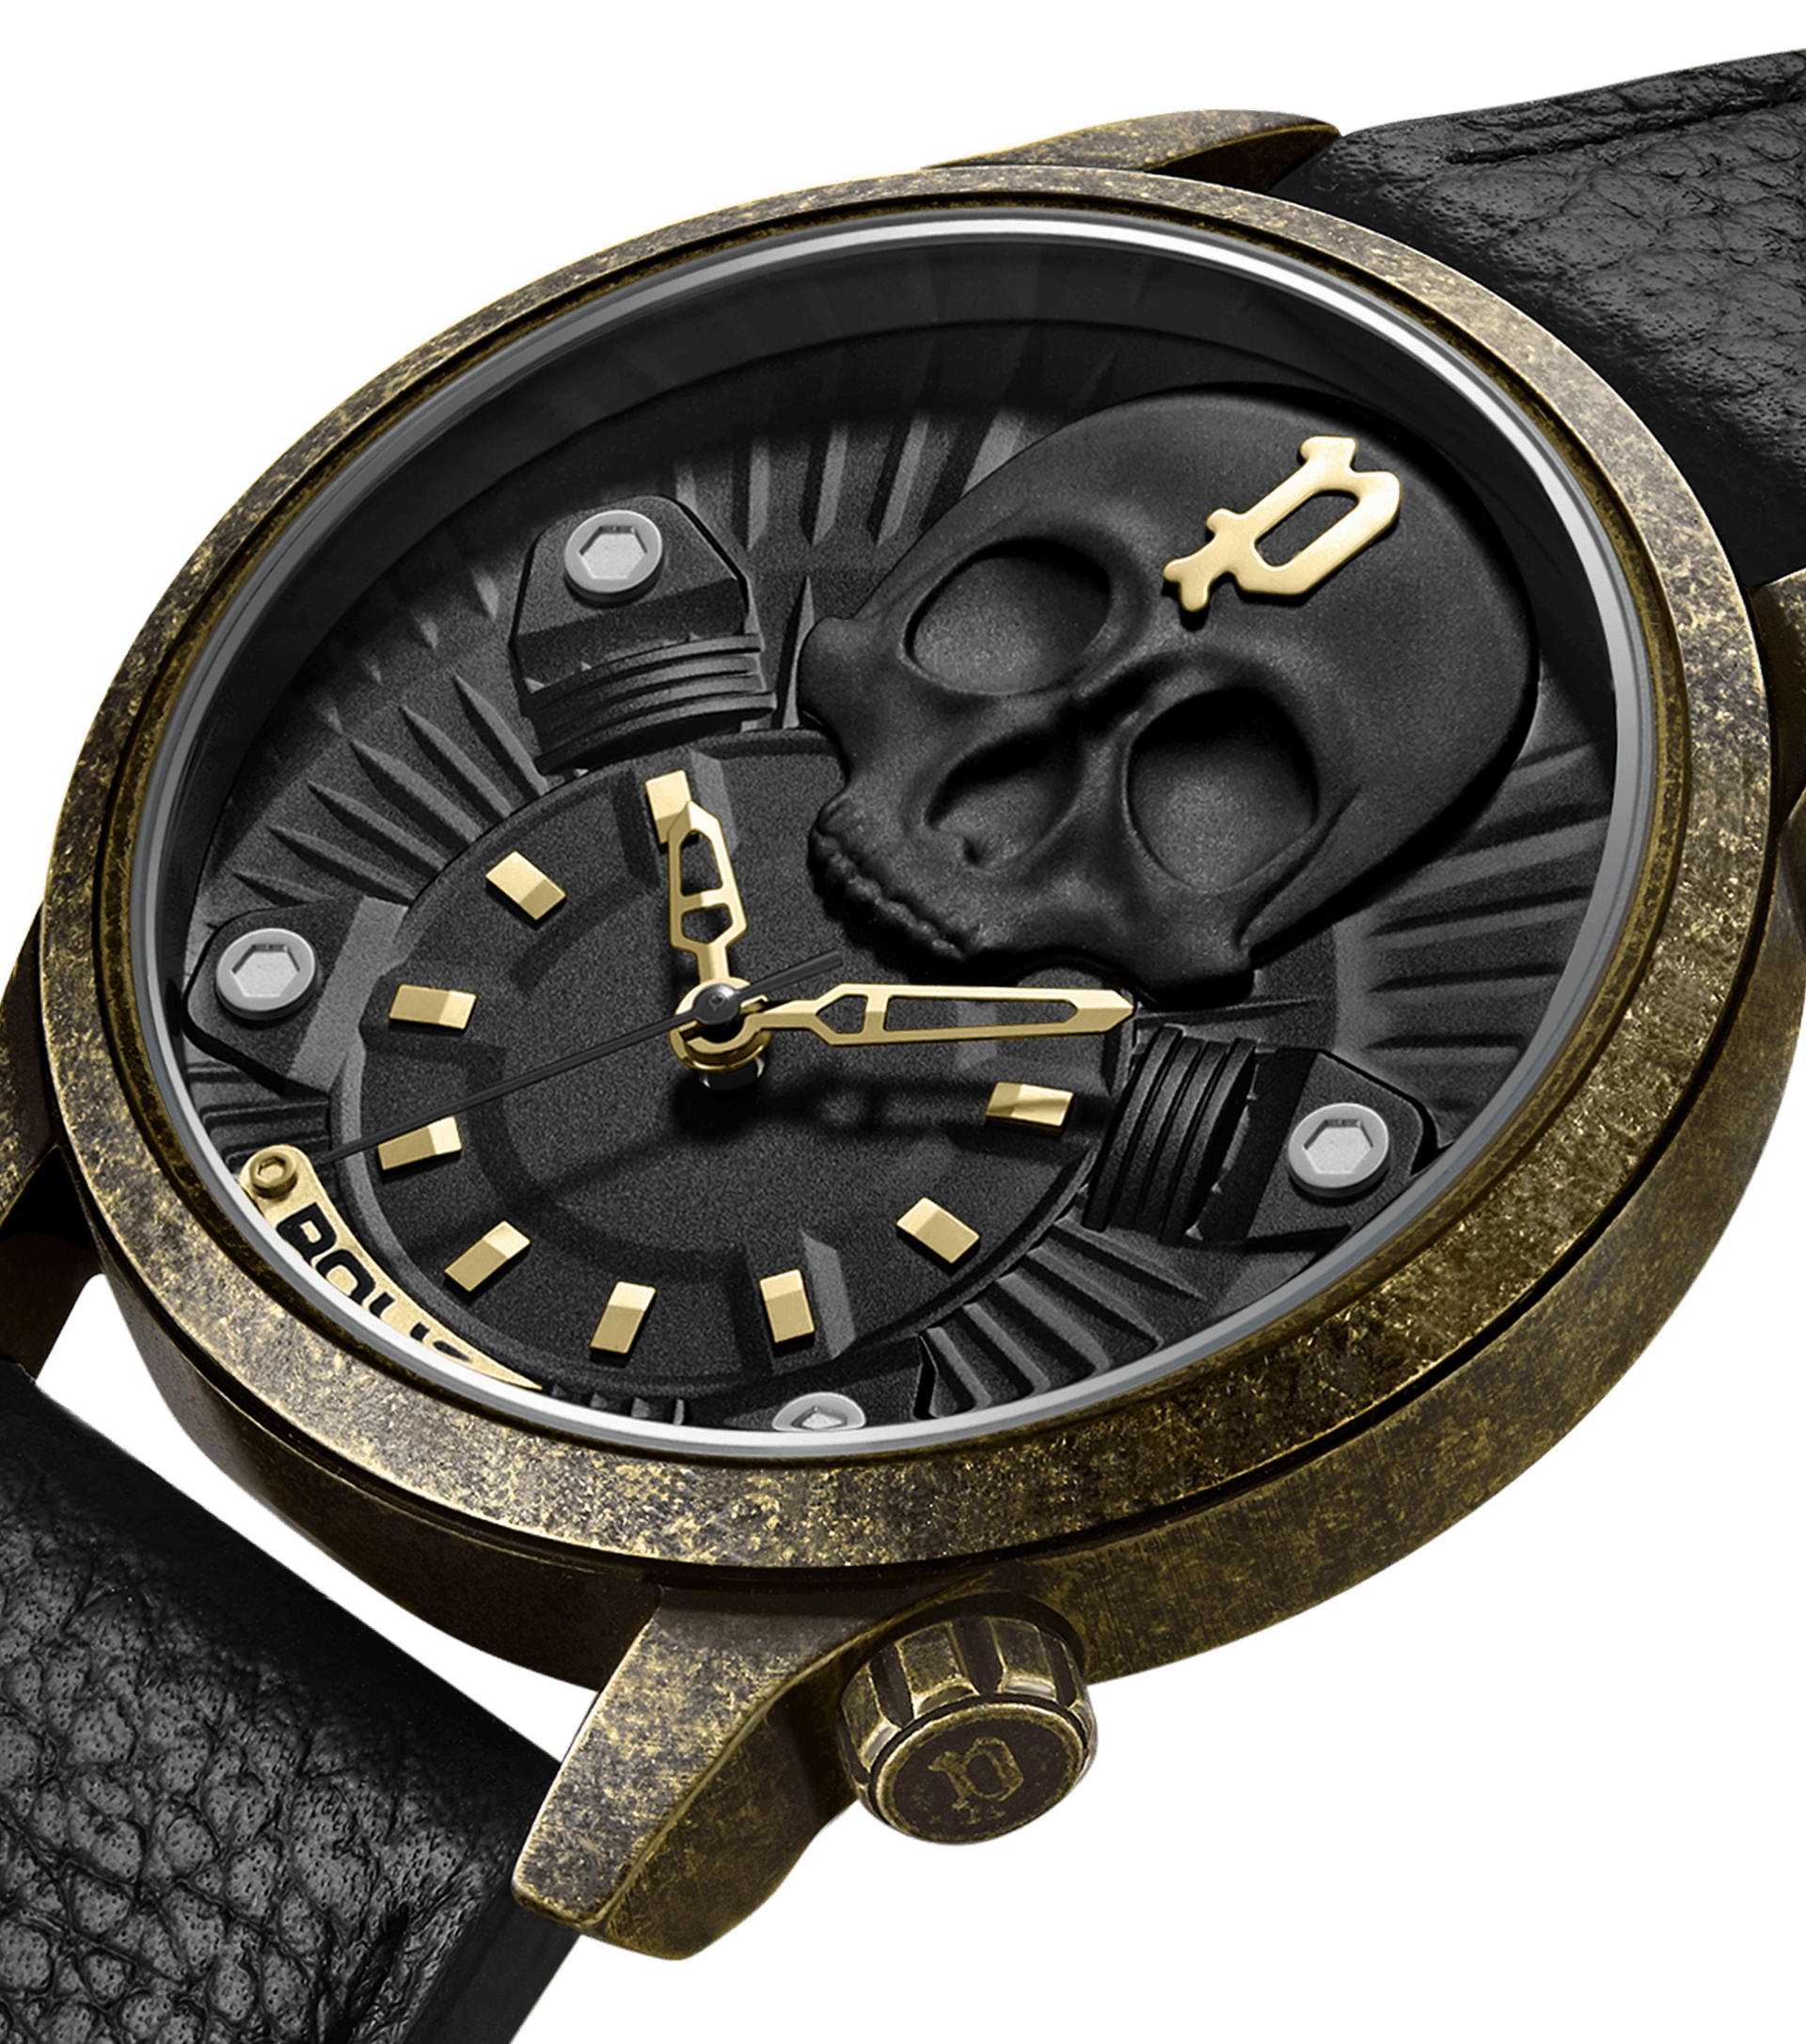 - For Black, Jet Police watches Gold Men Police By Watch